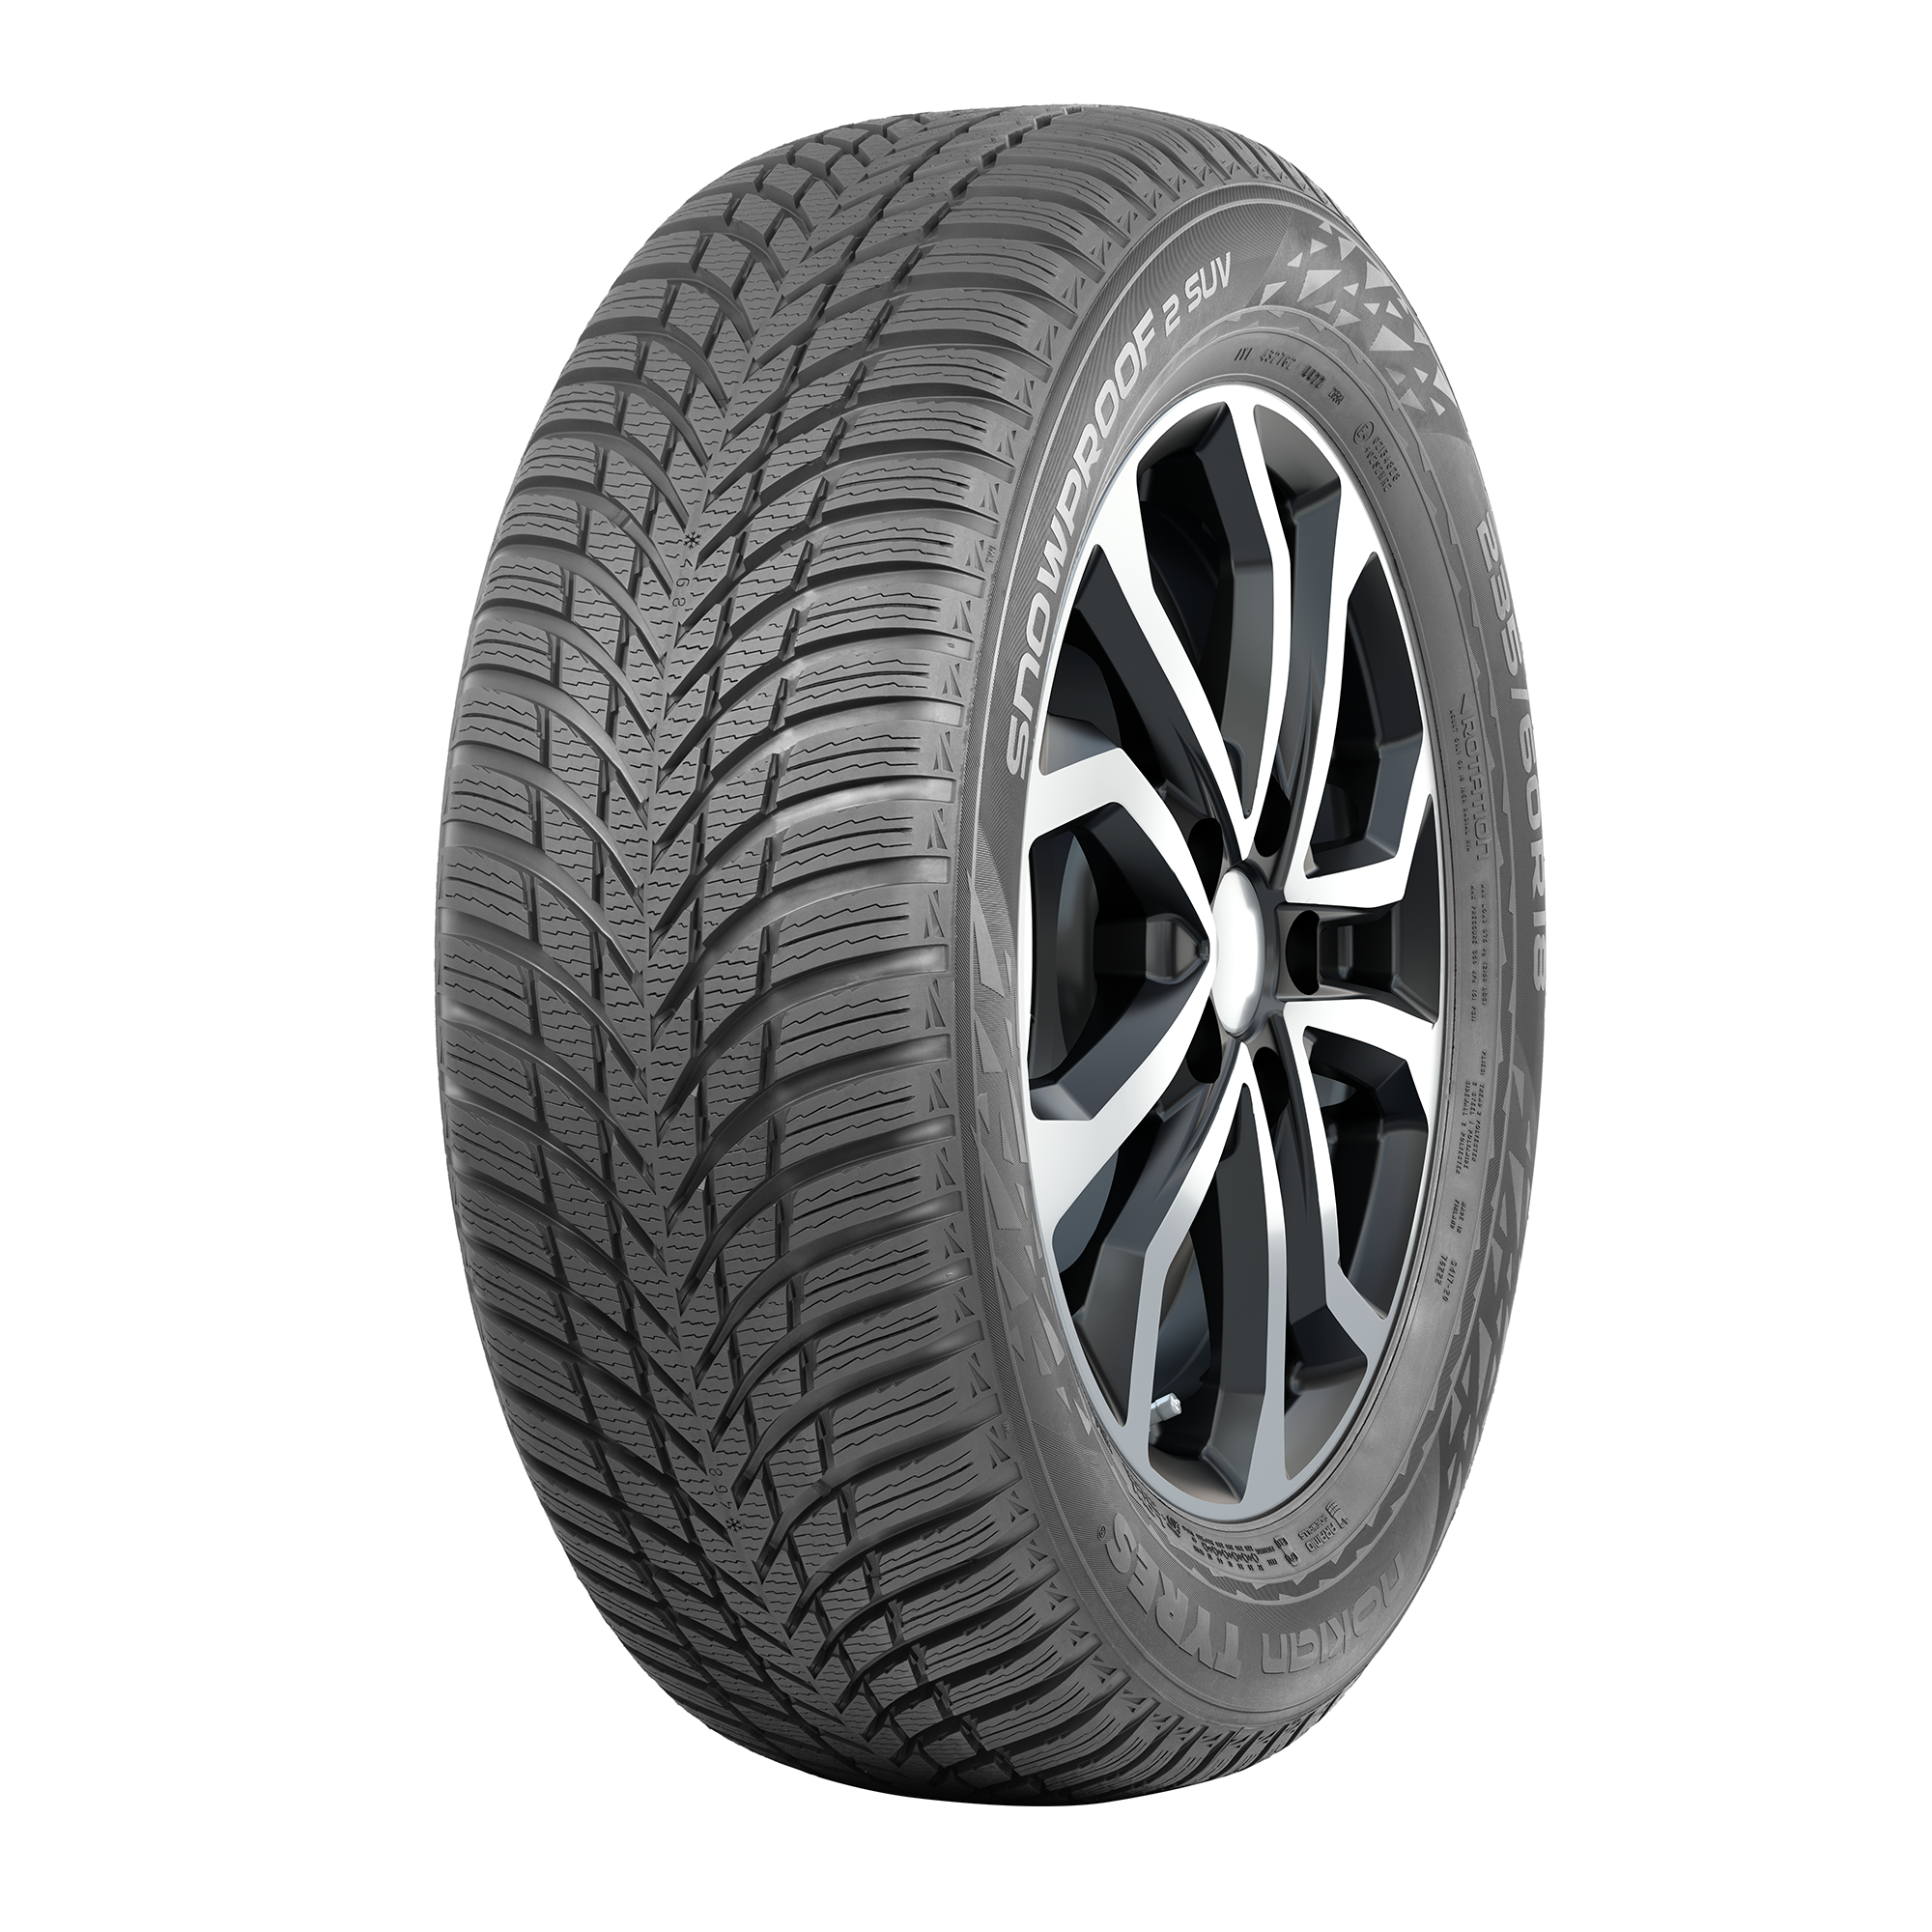 Nokian Tyres Snowproof 2 SUV XL 215/65 R17 103H